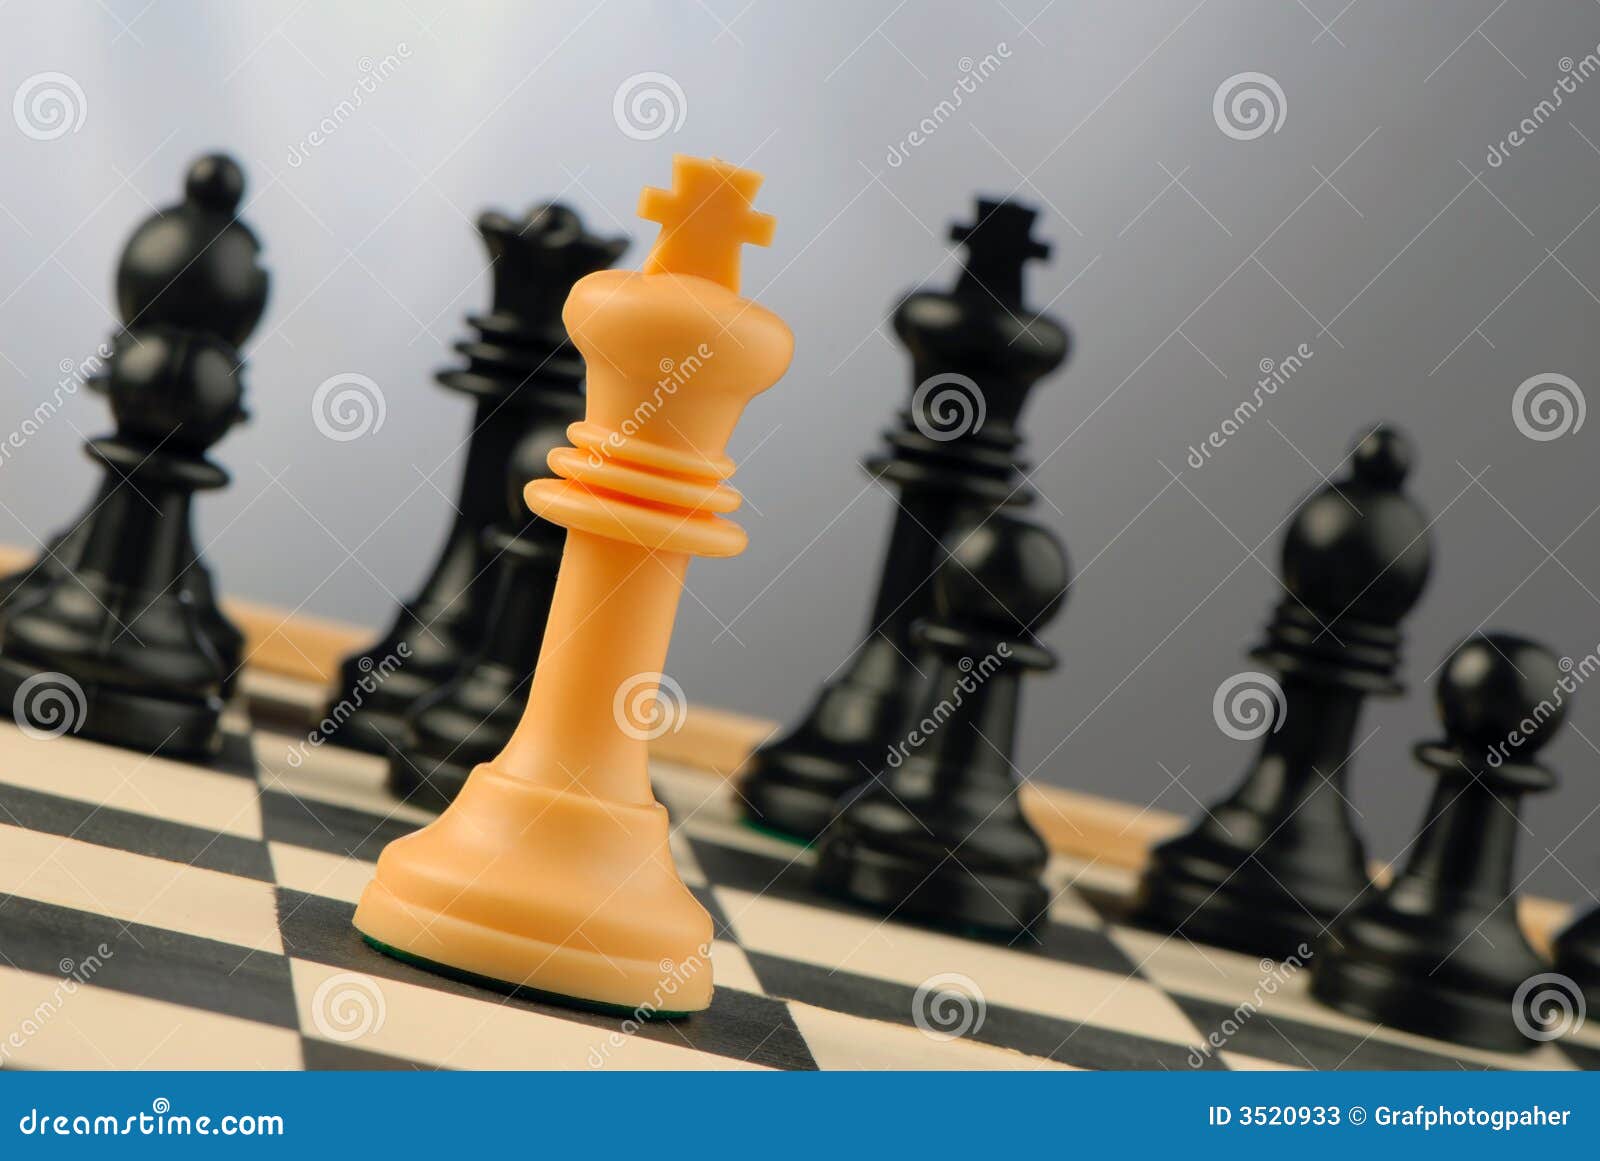 Chess-men stock image. Image of chess, object, close, side - 3520933